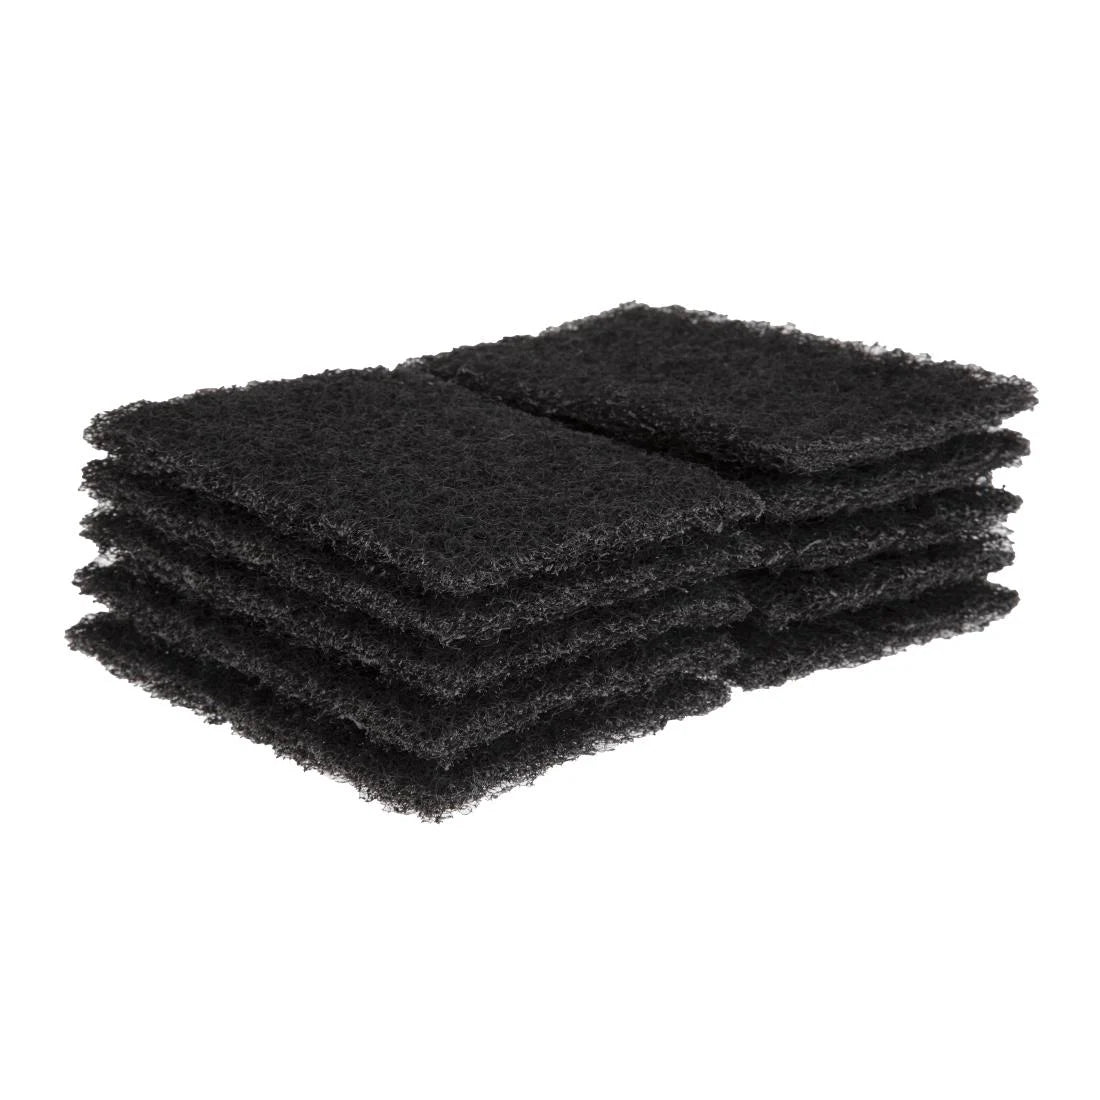 Griddle Cleaning Pad (Pack of 10).Product Ref:00617. In Stock